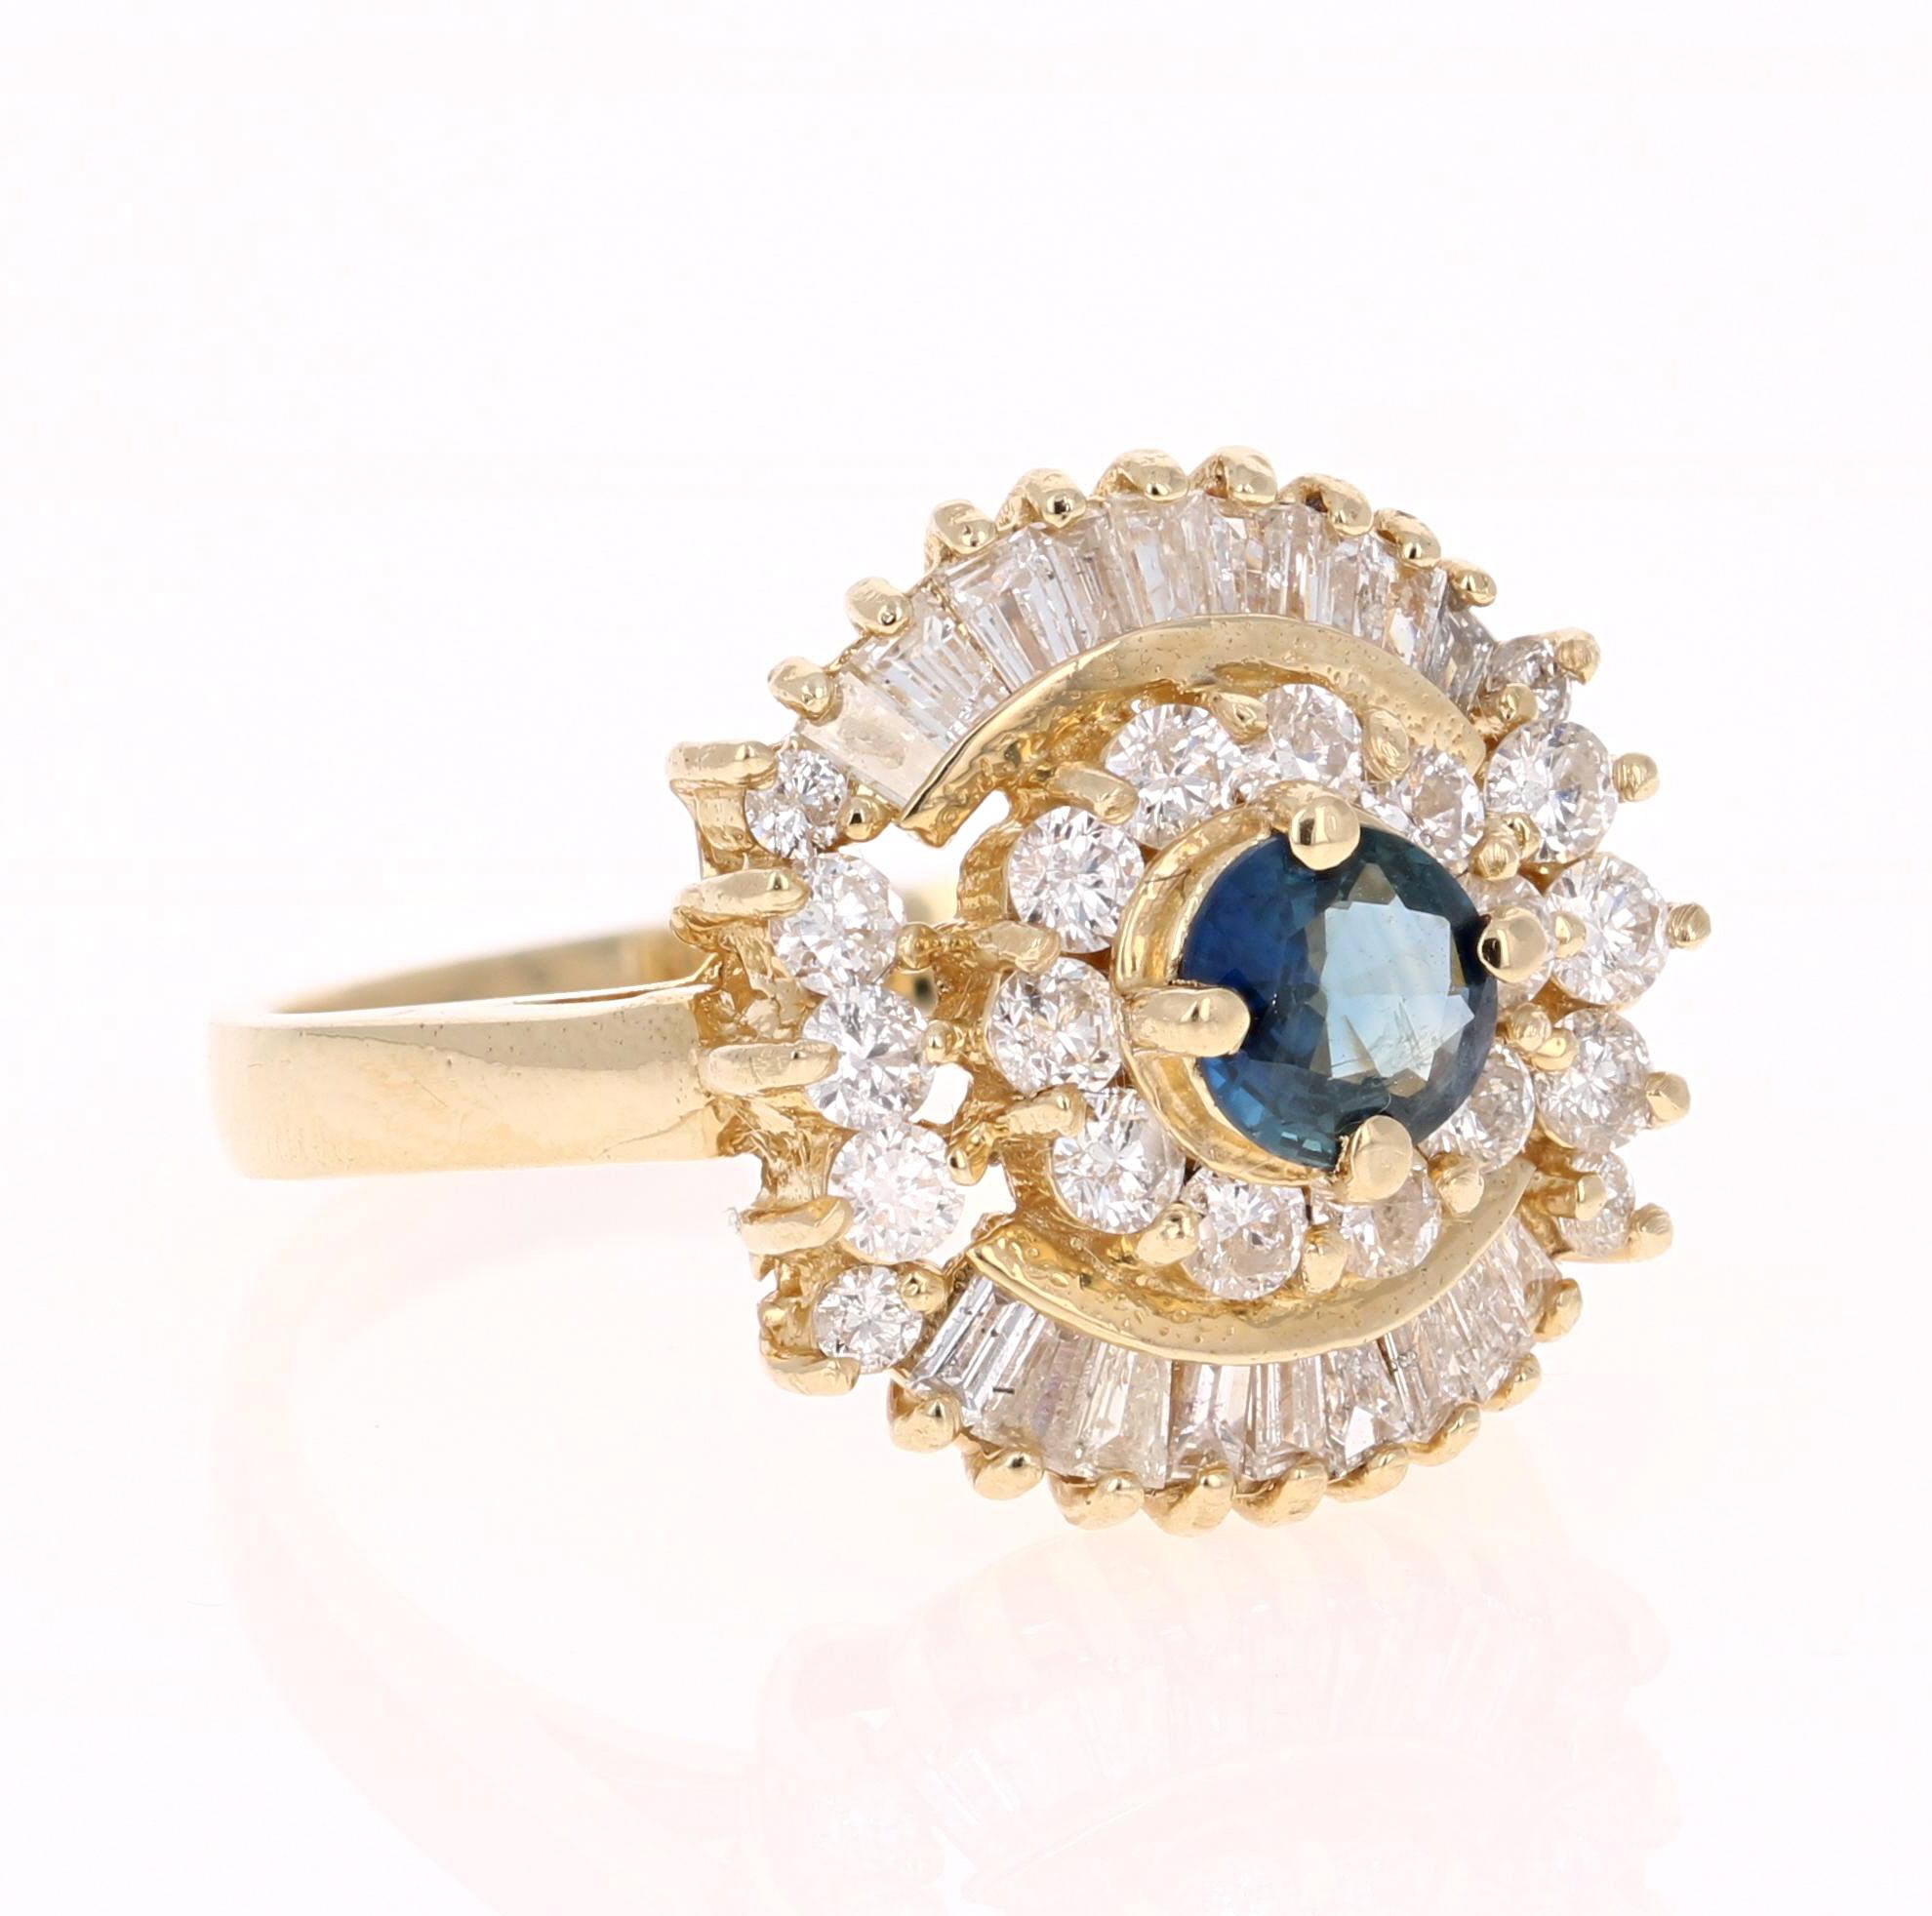 Charming Ballerina Sapphire Diamond Ring. 

This ring has a round cut Blue Sapphire weighing 0.45 Carats. It is embellished with 20 Round Cut Diamonds weighing 0.64 Carats and 18 Baguette Cut Diamonds weighing 0.35 Carats. The total carat weight of